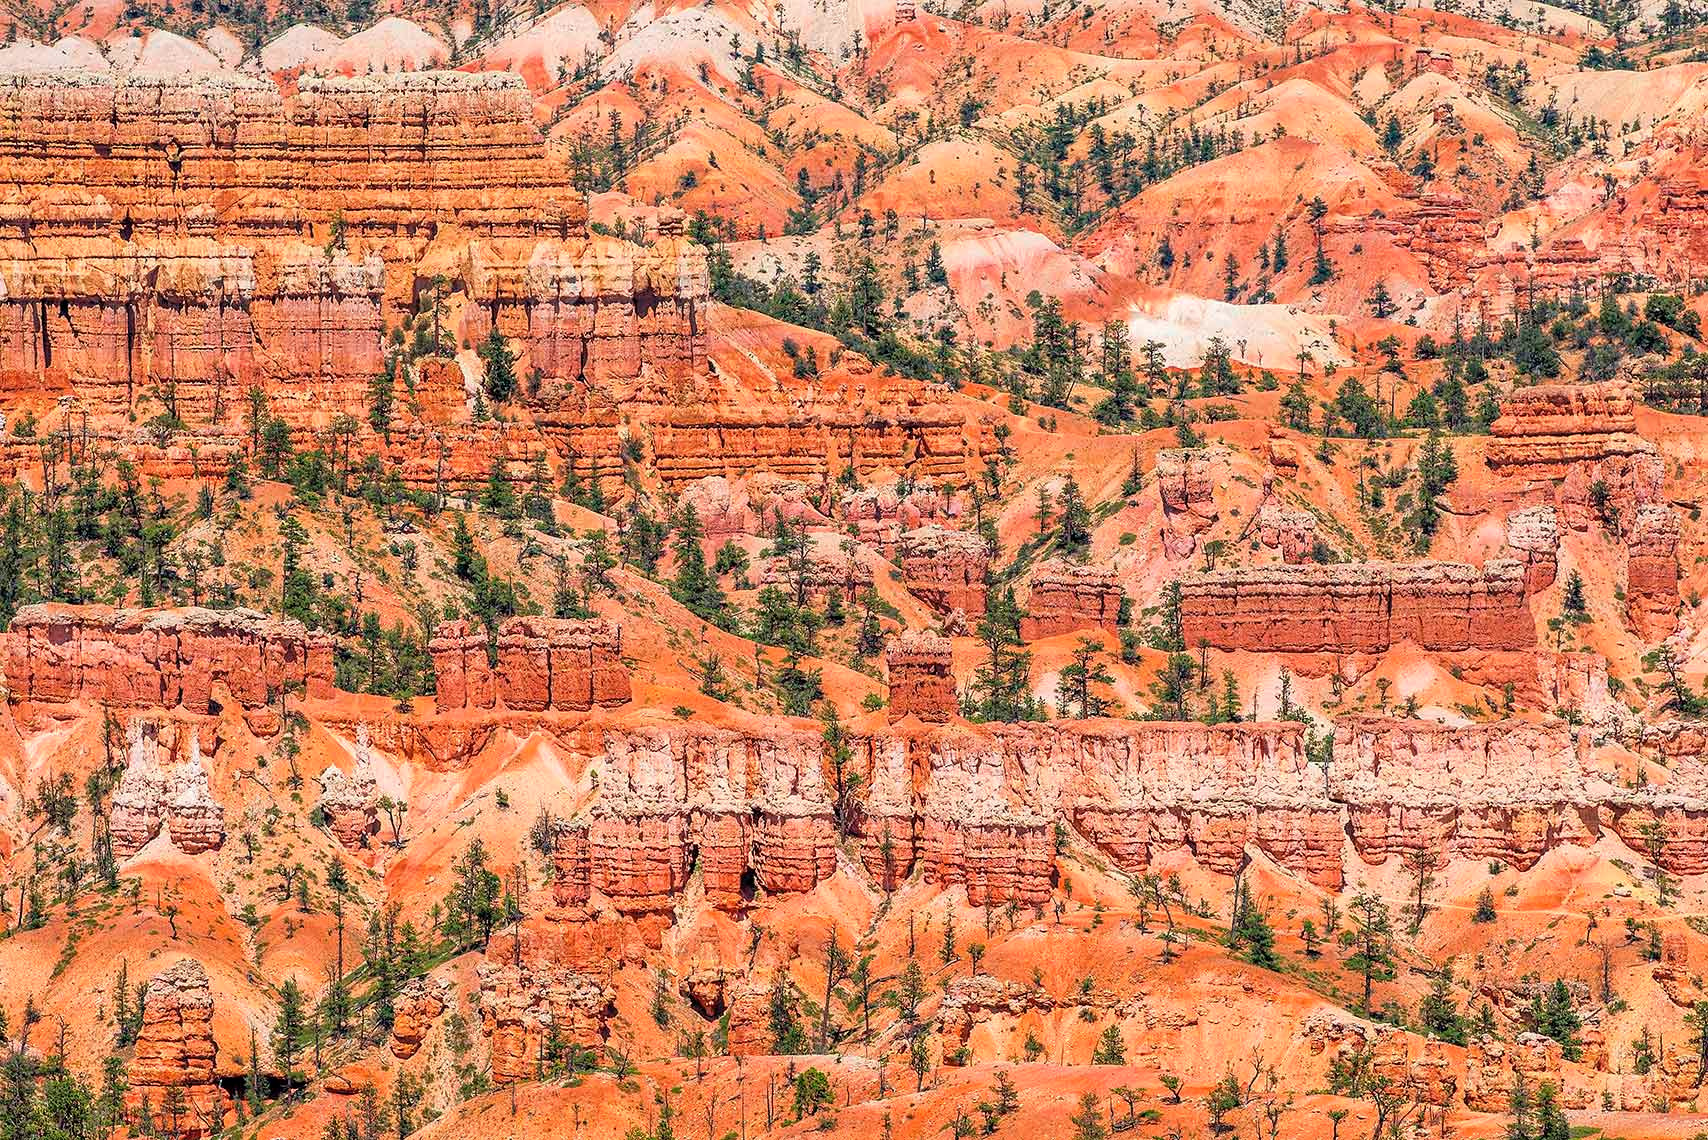 Zoe Wetherall photographs a birds eye view of Bryce Canyon from a hot air balloon for her series "Earth."